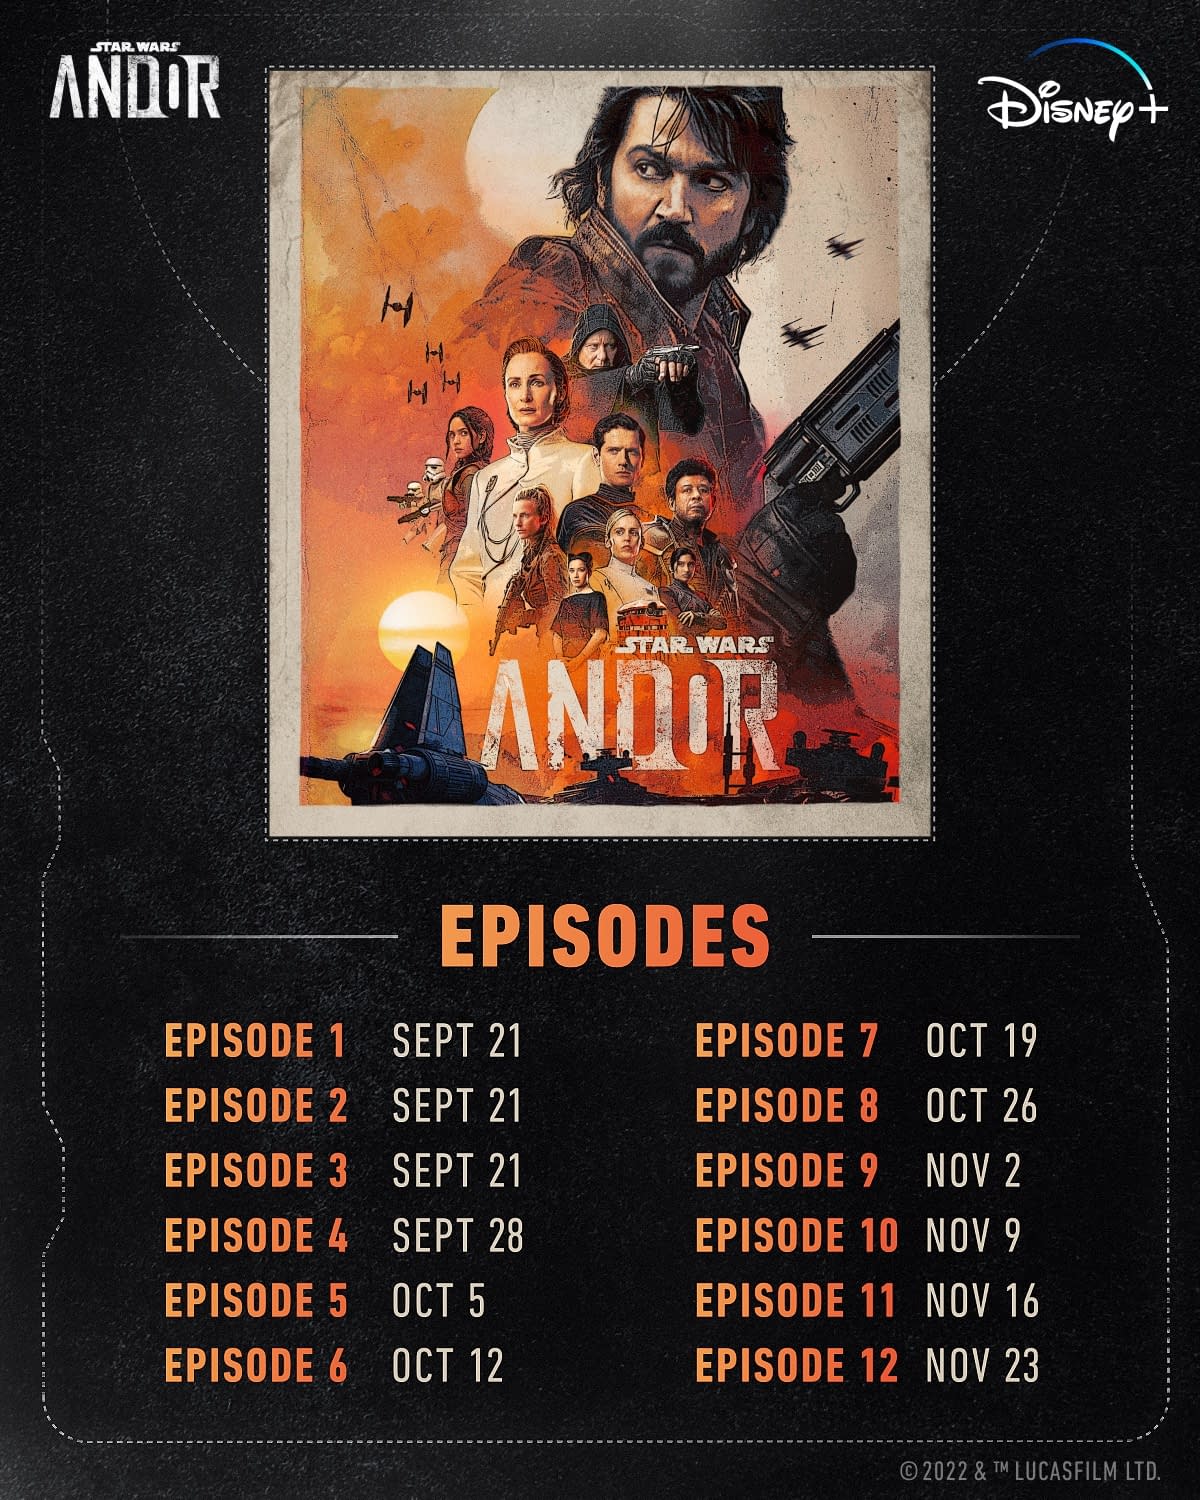 Andor timeline: How long before Rogue One and Star Wars A New Hope